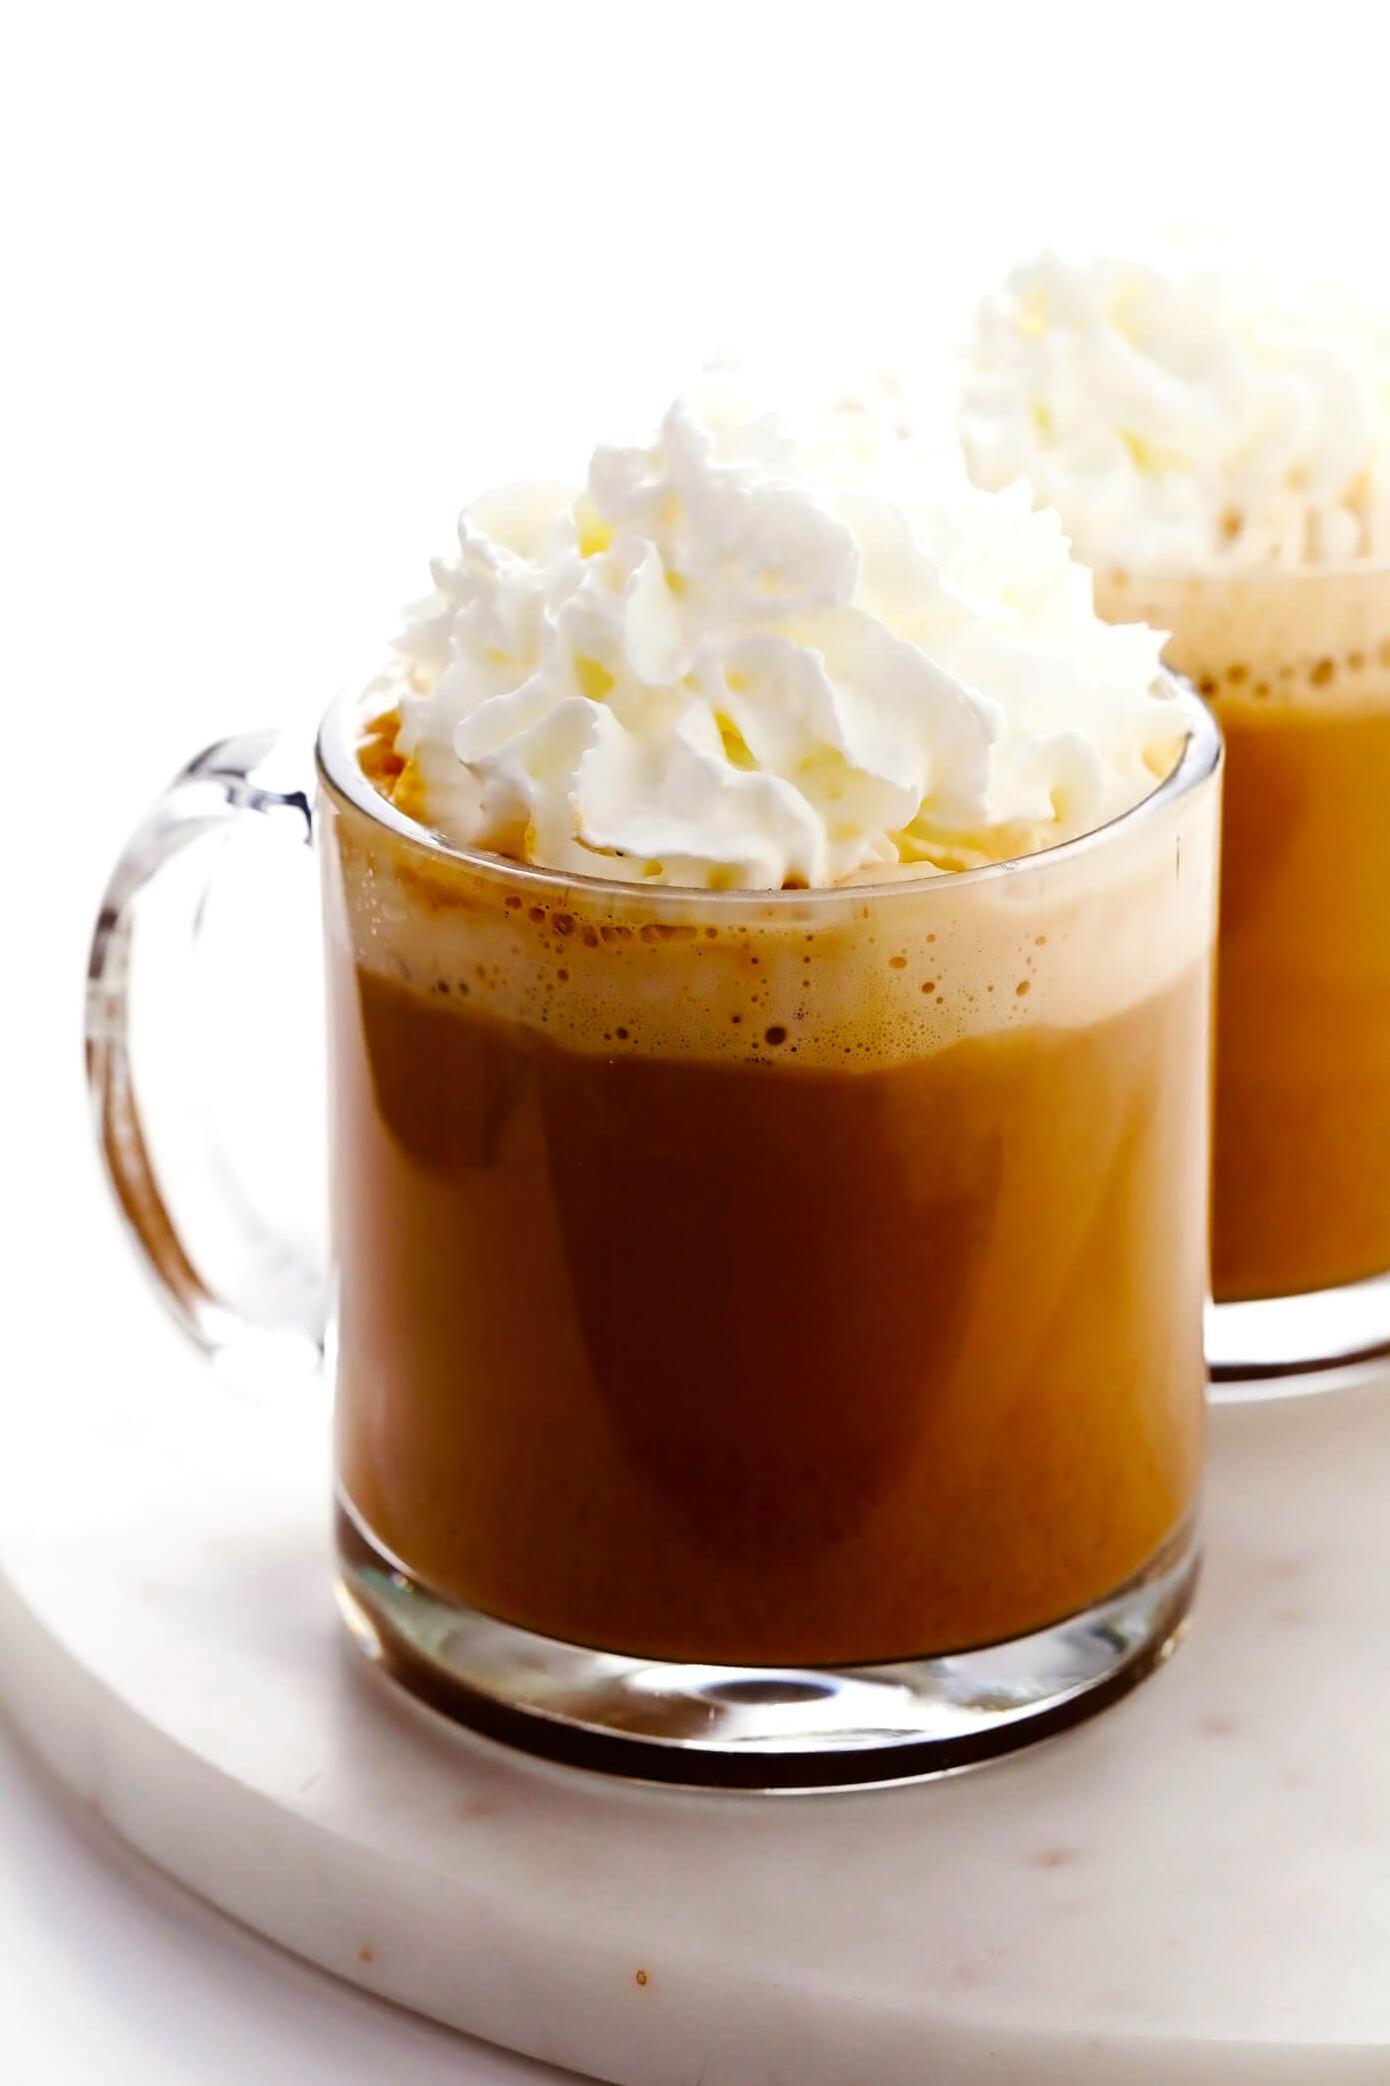  Forget the pie, this latte is the ultimate pumpkin dessert alternative.